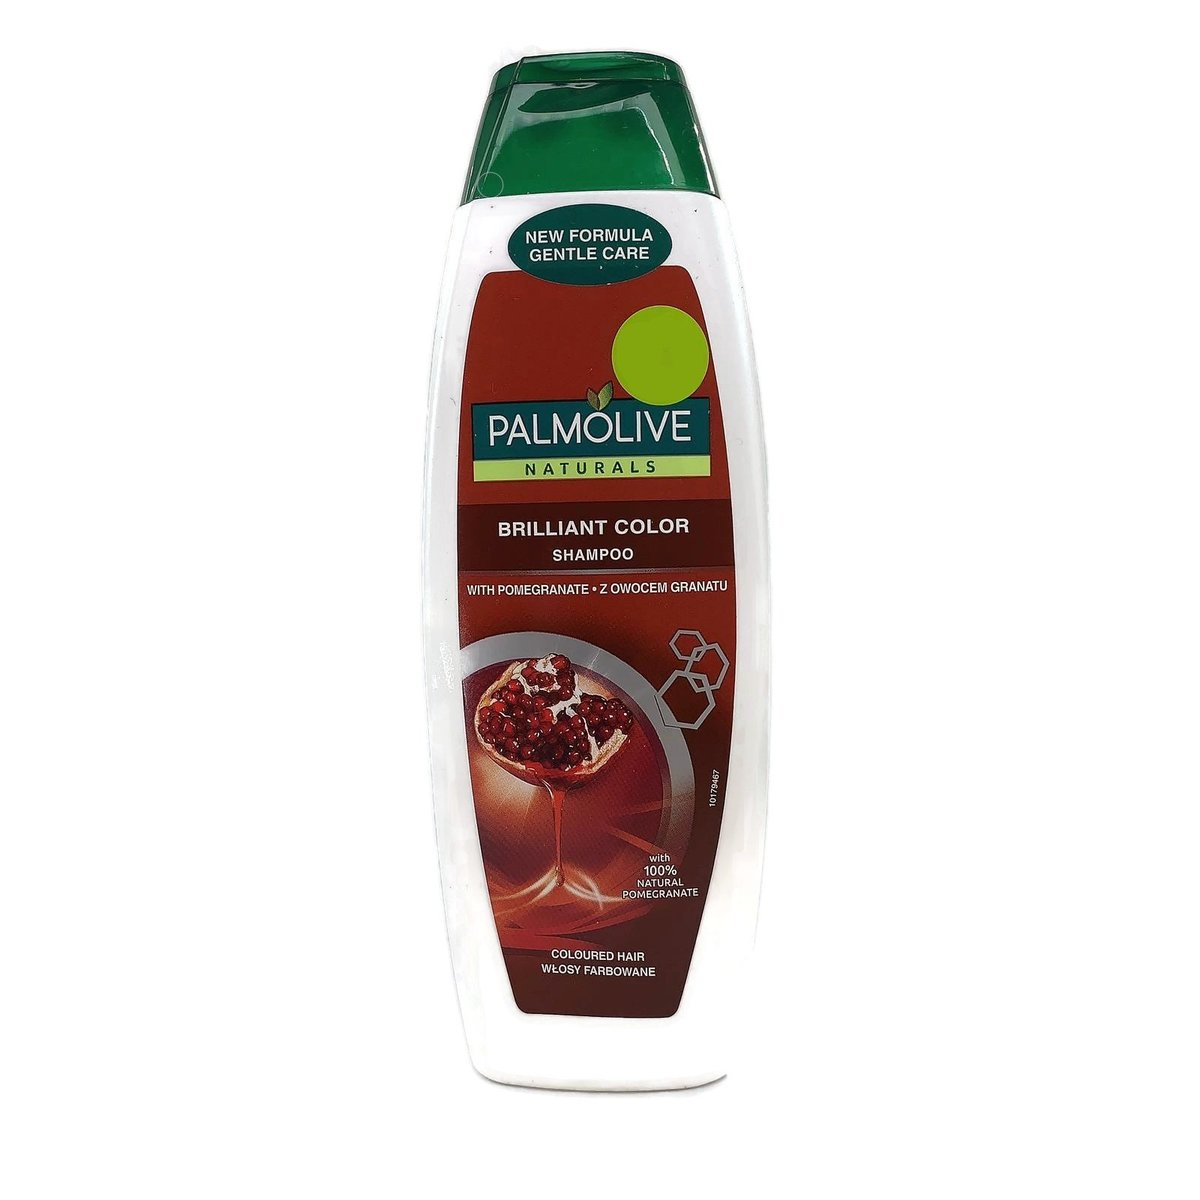 Brilliant Colour Shampoo with Pomegranate 350ml【Parallel Import】Made in Italy #7175 Palmolive